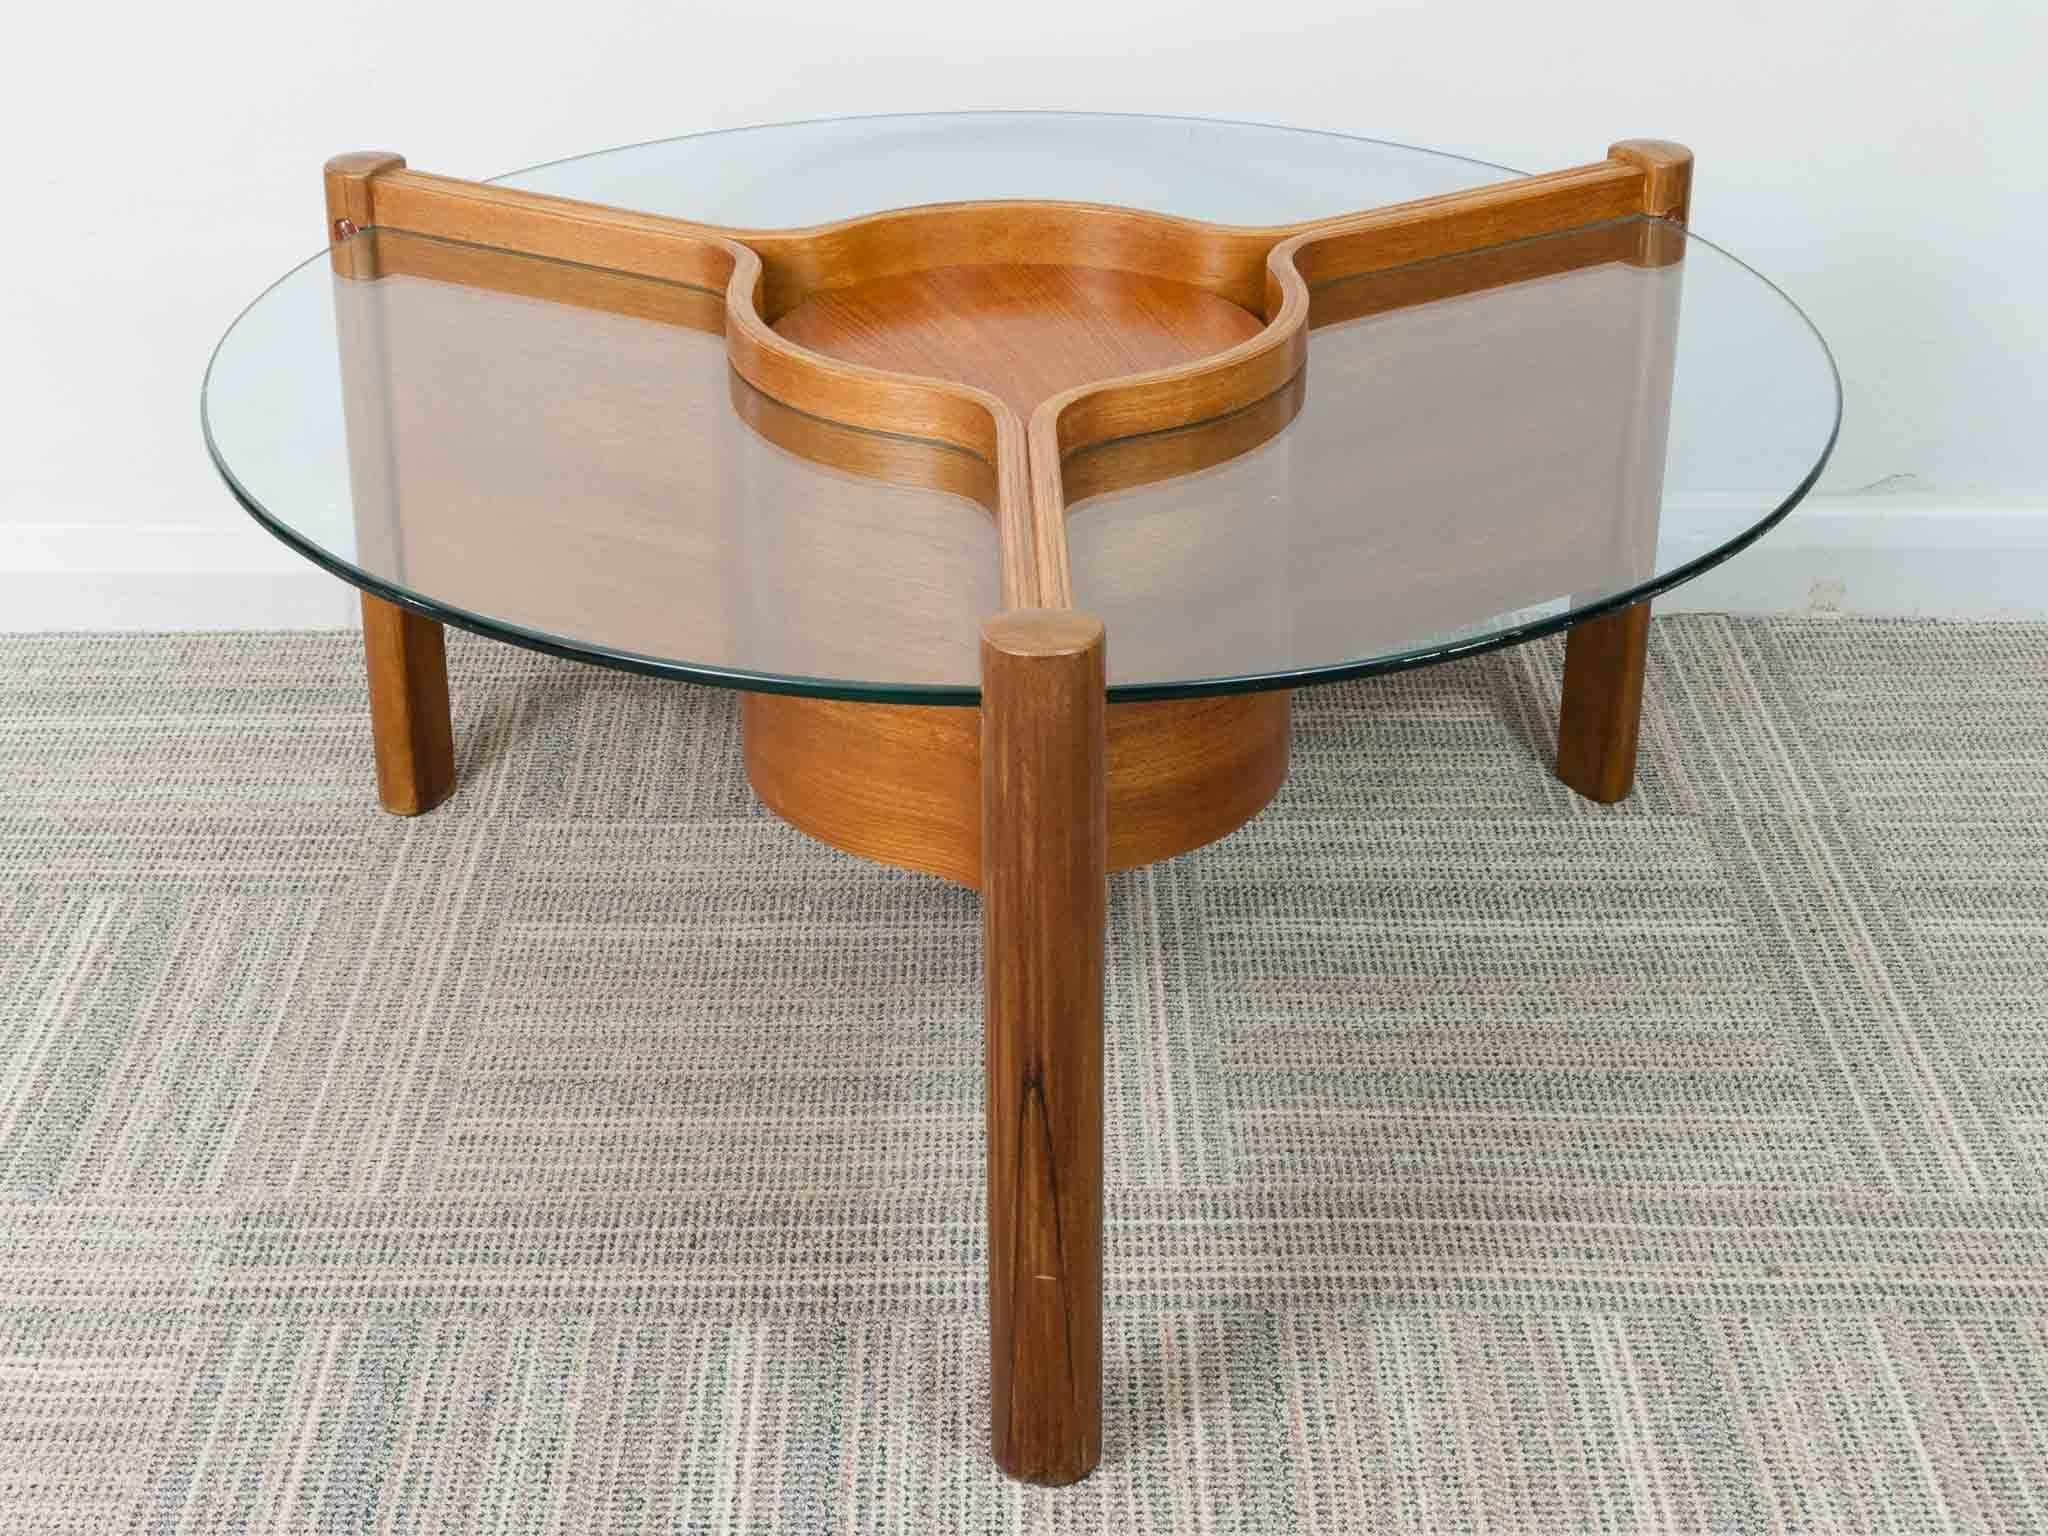 1960s Space Age coffee table manufactured by the English furniture maker Nathan. An interesting and well-designed round table made from thermoformed plywood with a central detachable tray. The table is composed of three separate glass sections which